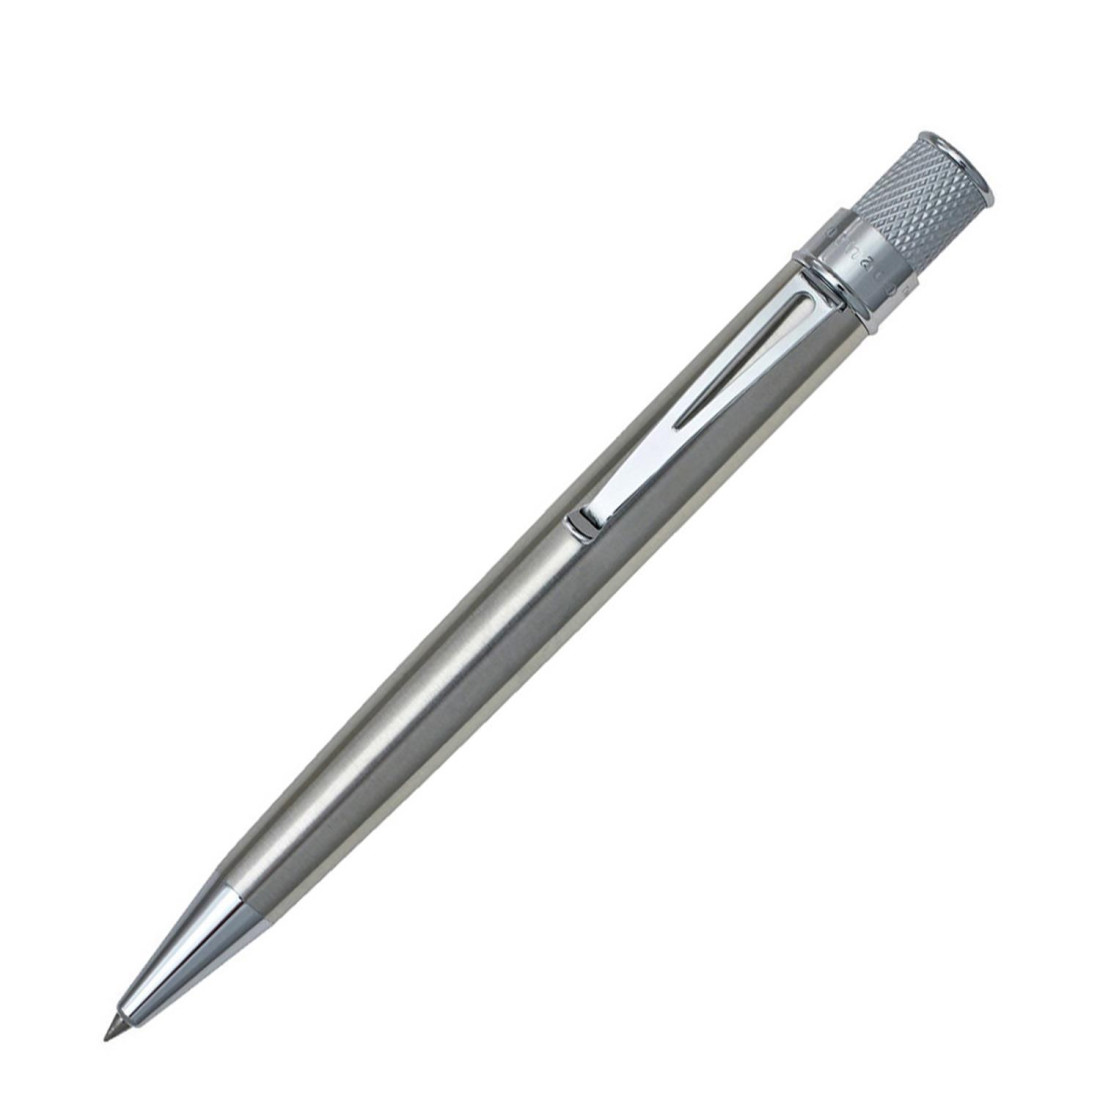 RETRO 1951 TORNADO CLASSIC LAQUER Stainless VRR-1315 ROLLERBALL